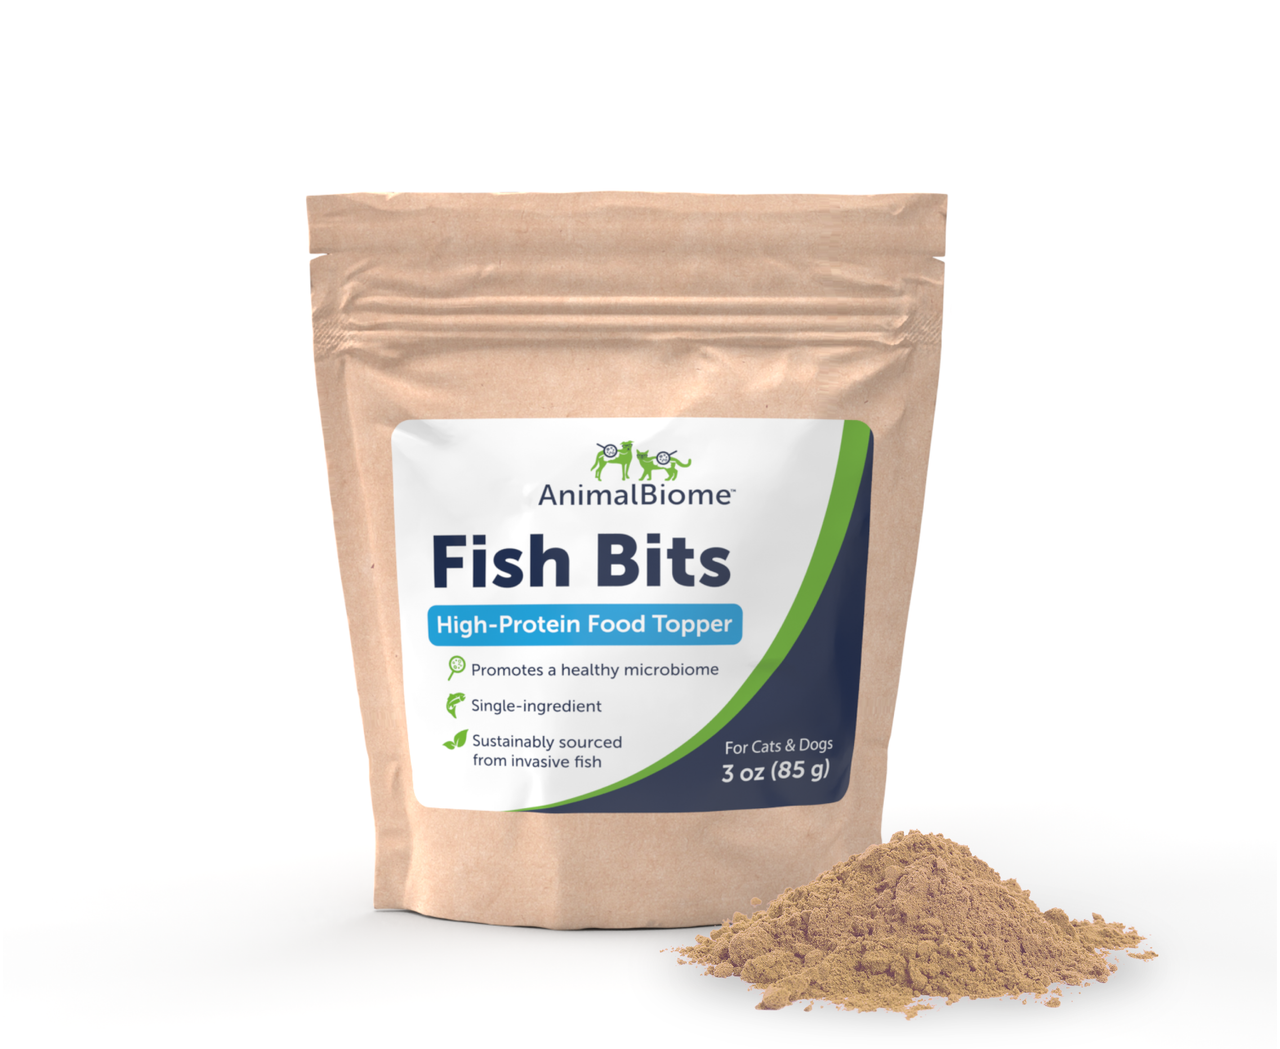 AnimalBiome™ Fish Bits High-Protein Food Topper